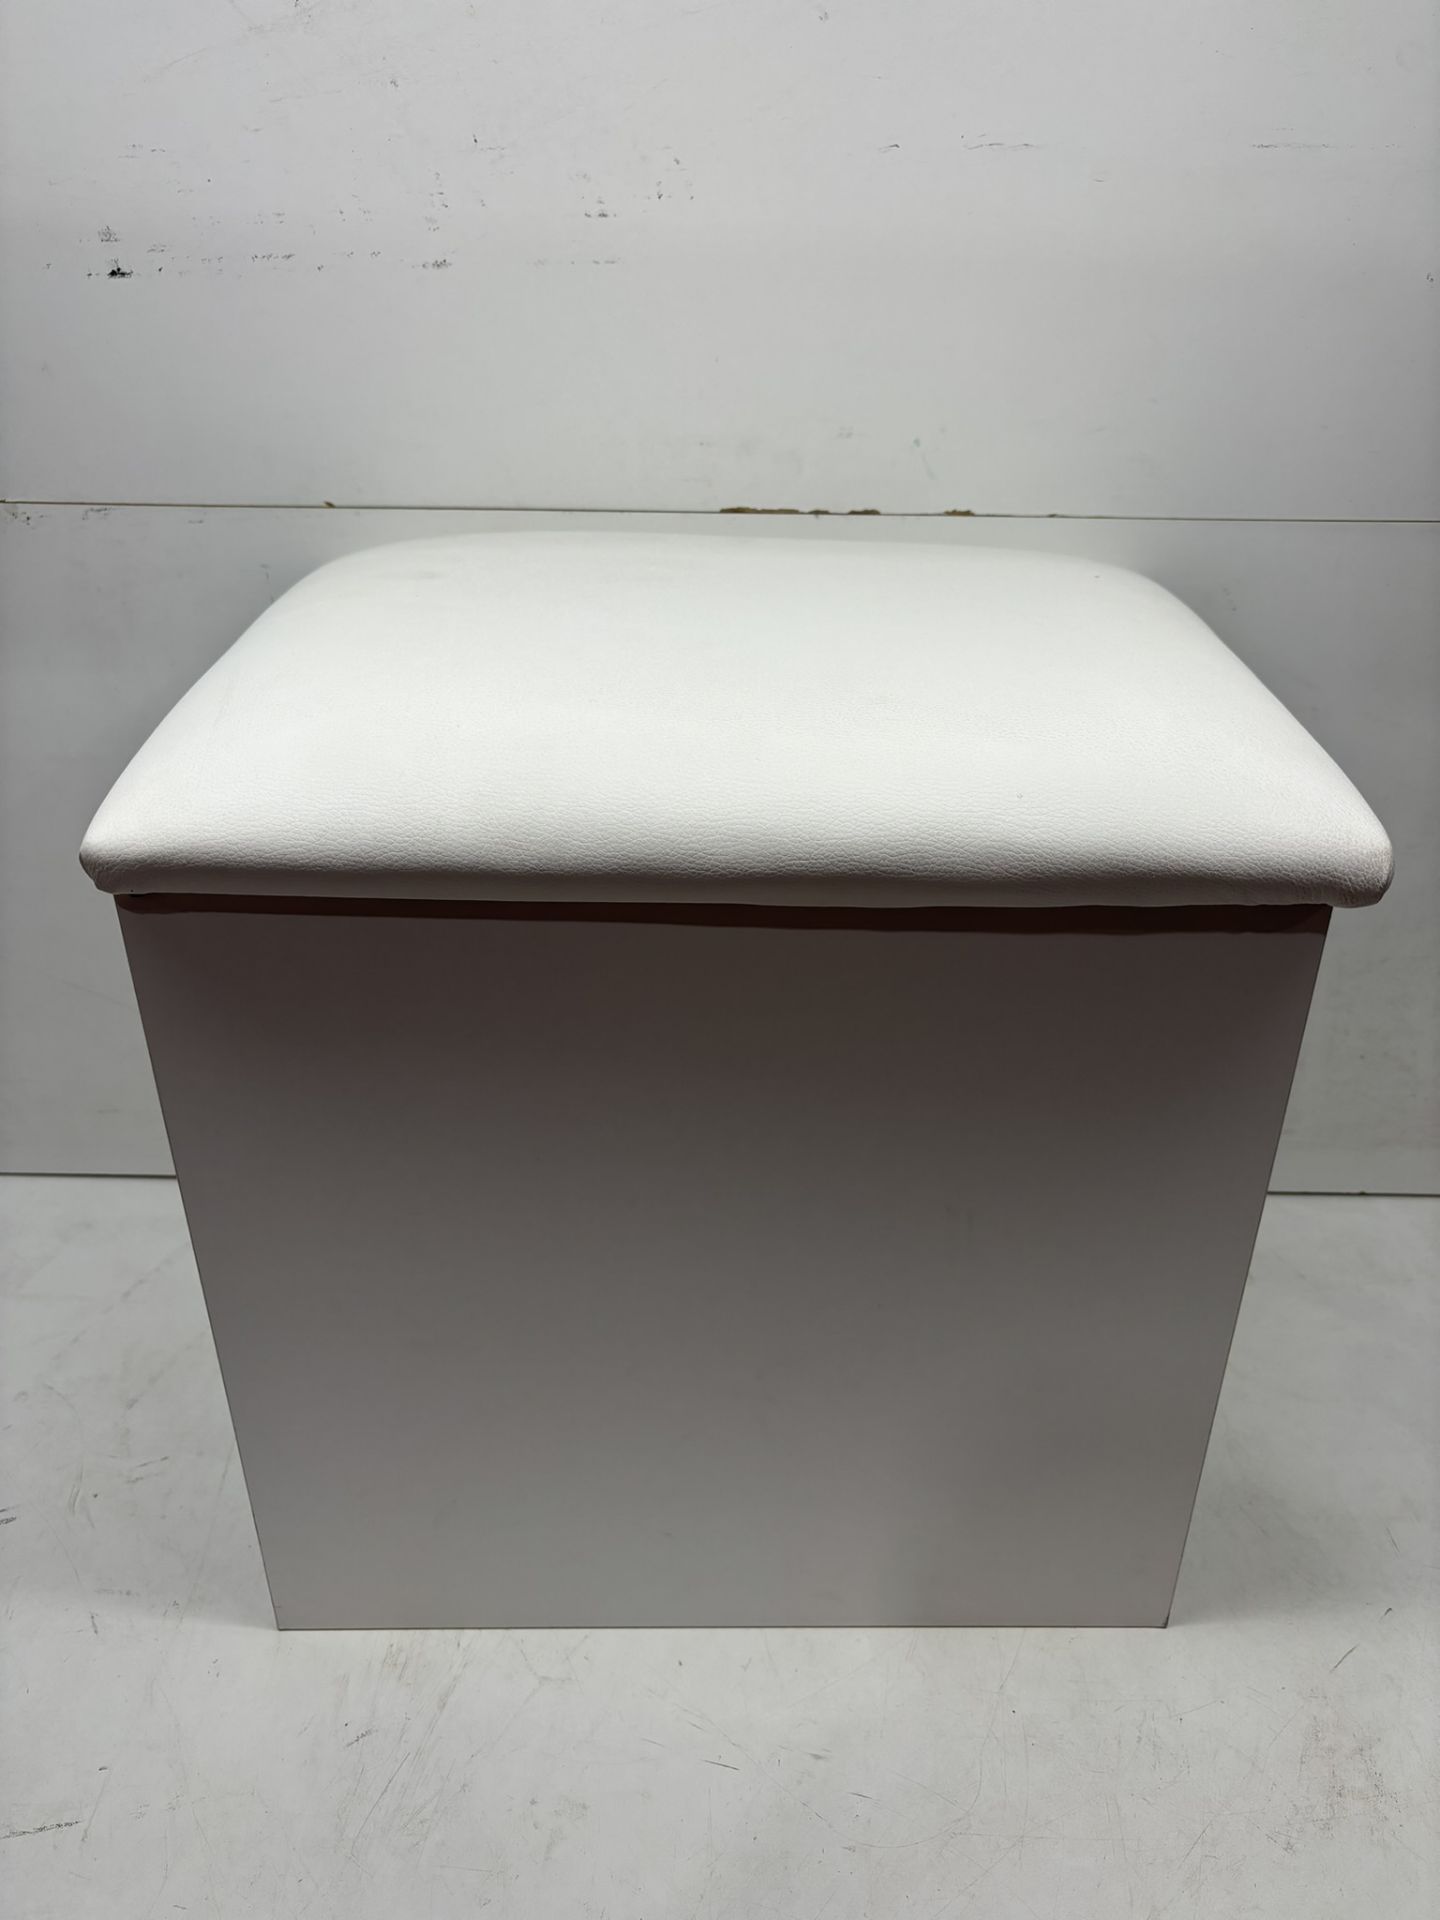 Ex-Display Small Wooden White Footstool With Cushioned Top - Image 2 of 4